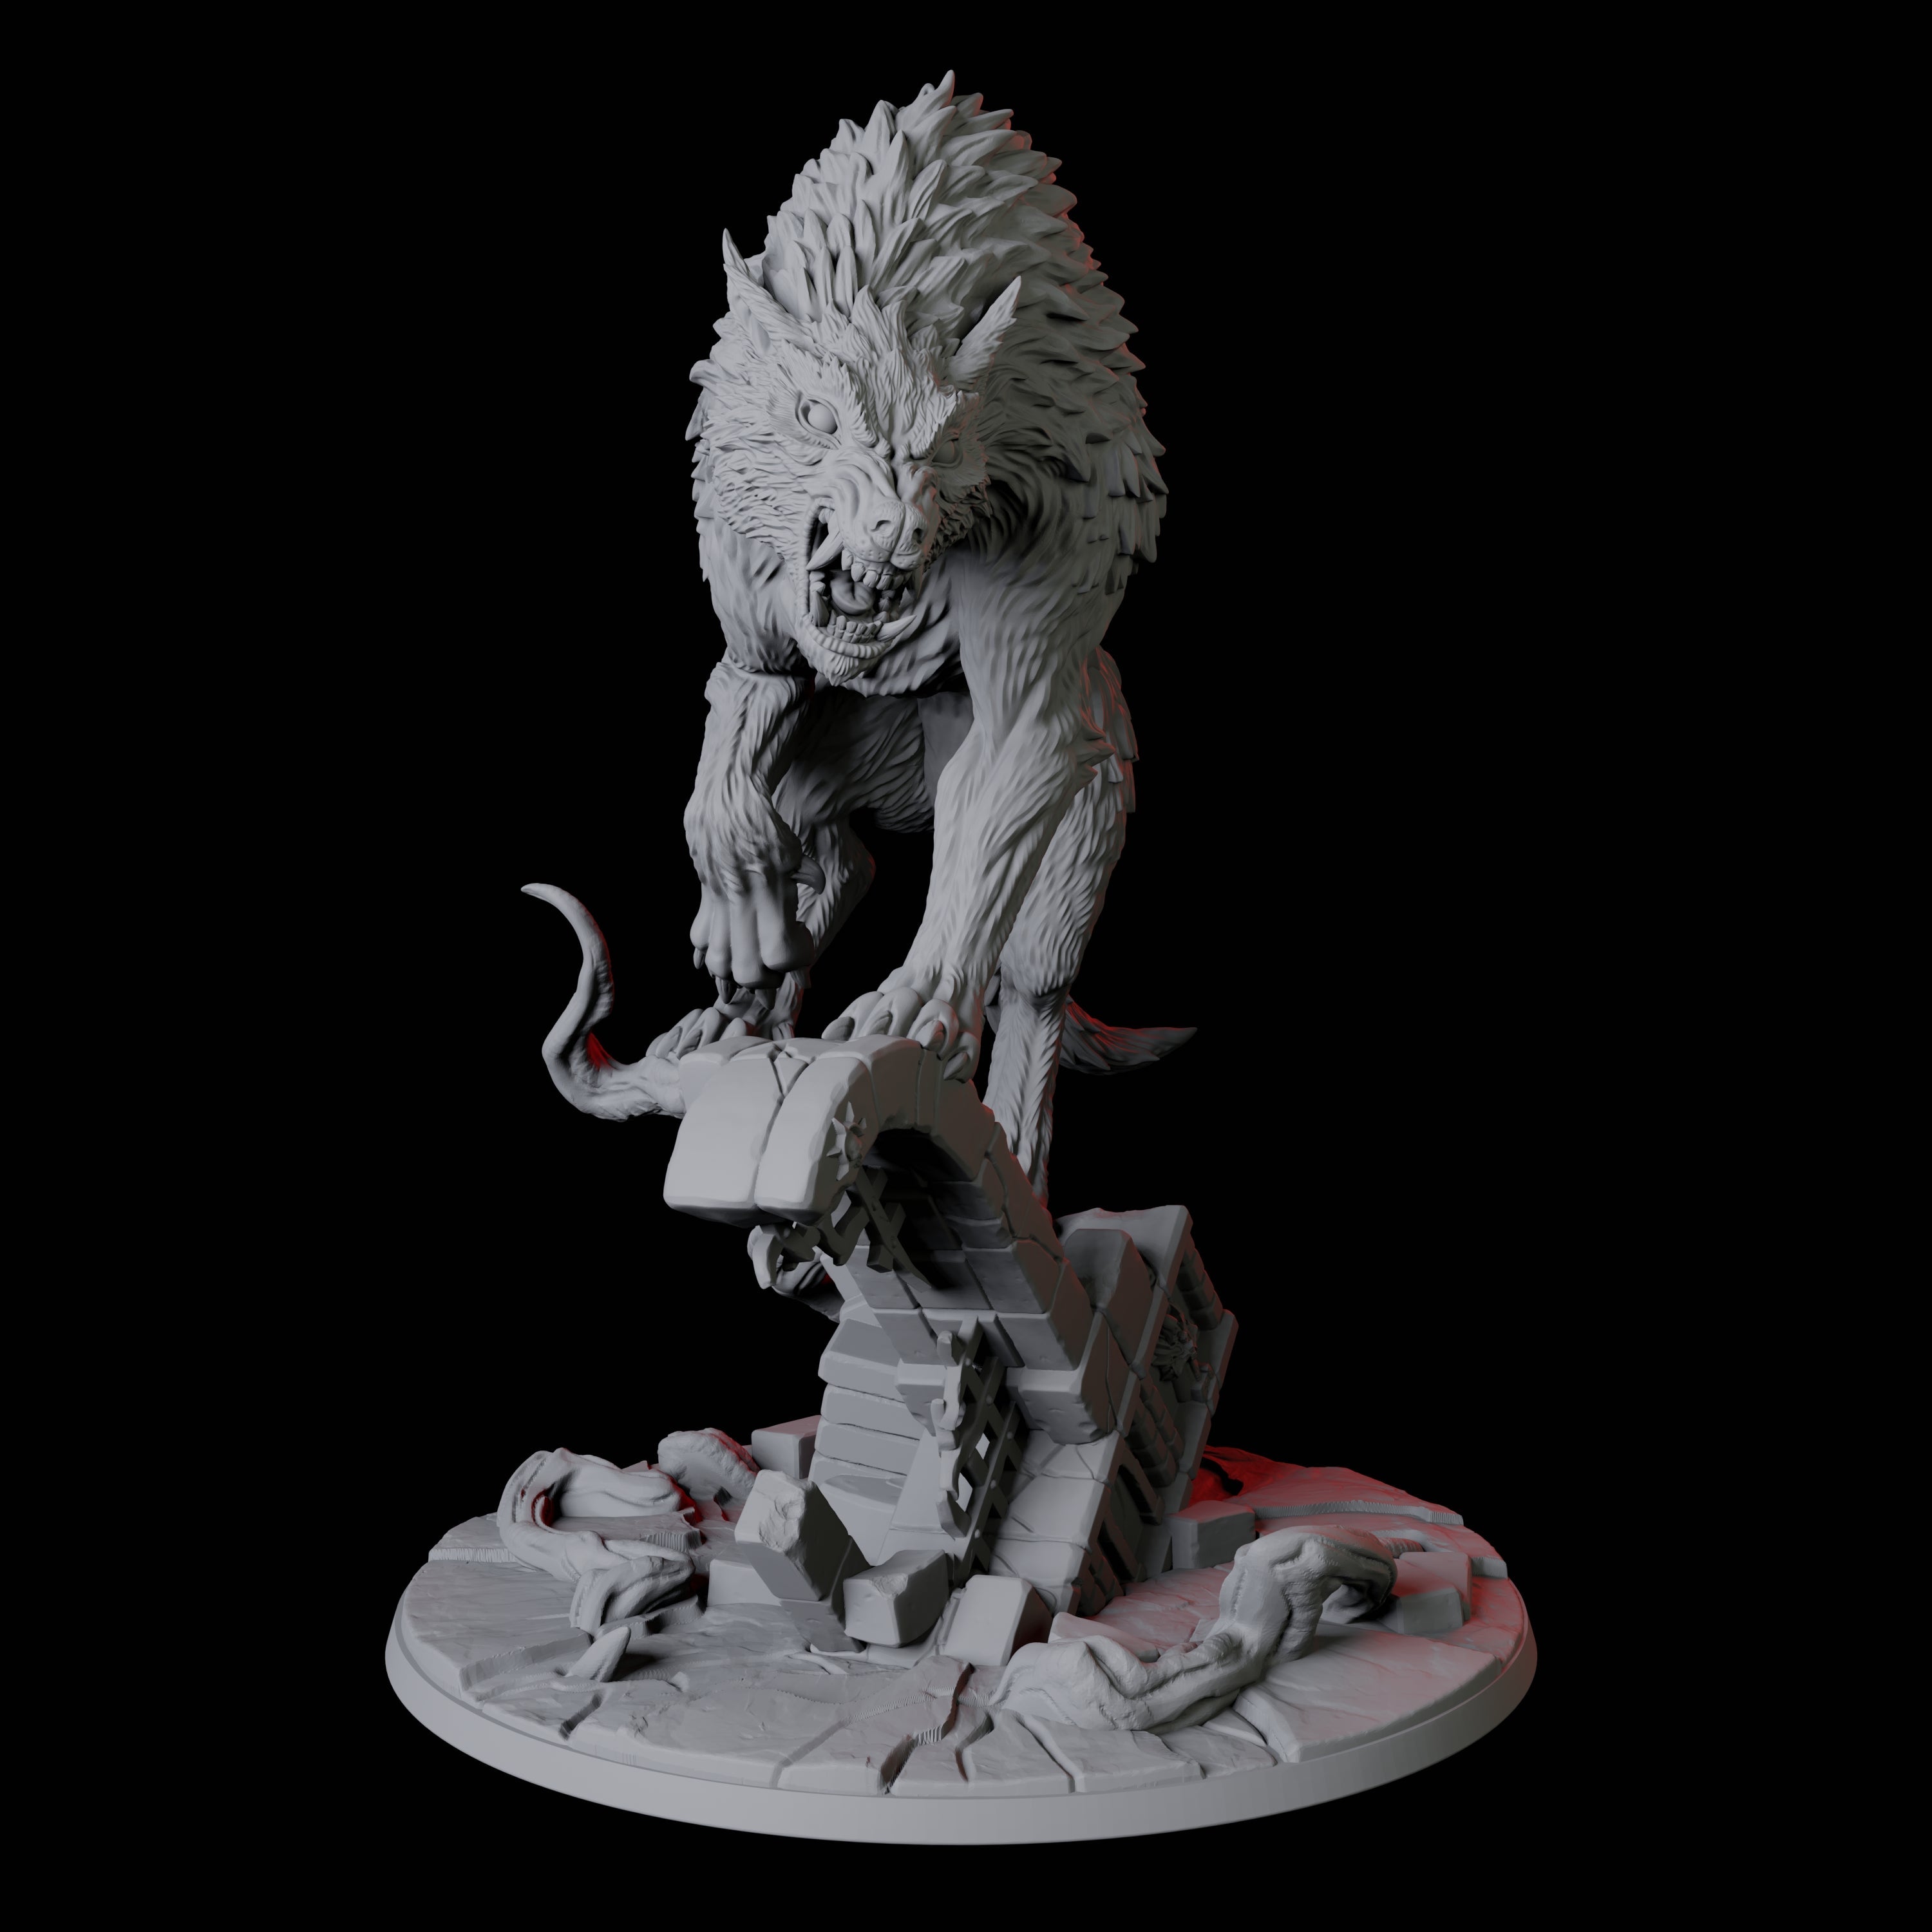 Ferocious Sword-Wielding Werewolf Miniature for Dungeons and Dragons, Pathfinder or other TTRPGs